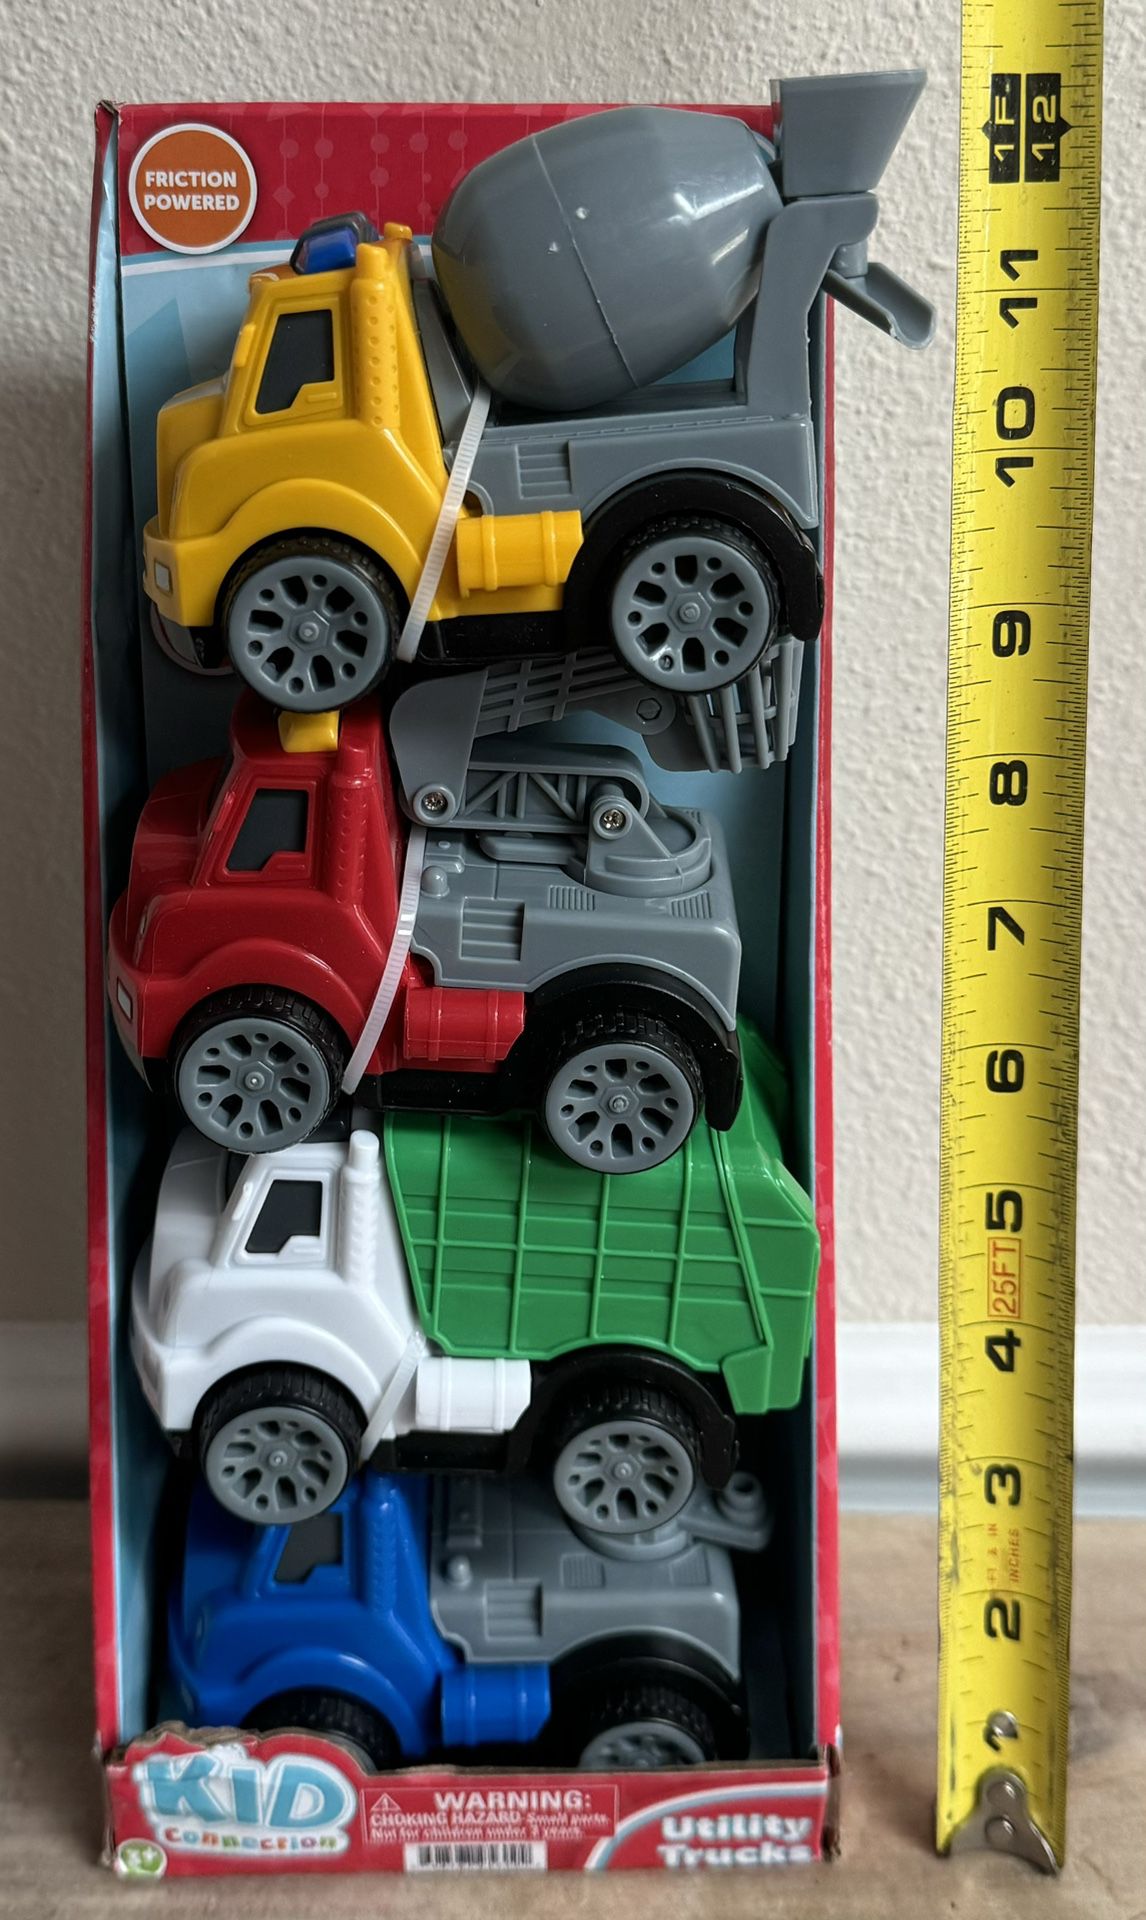 NEW in Package Set of Four Friction Powered Utility Trucks just $8 xox